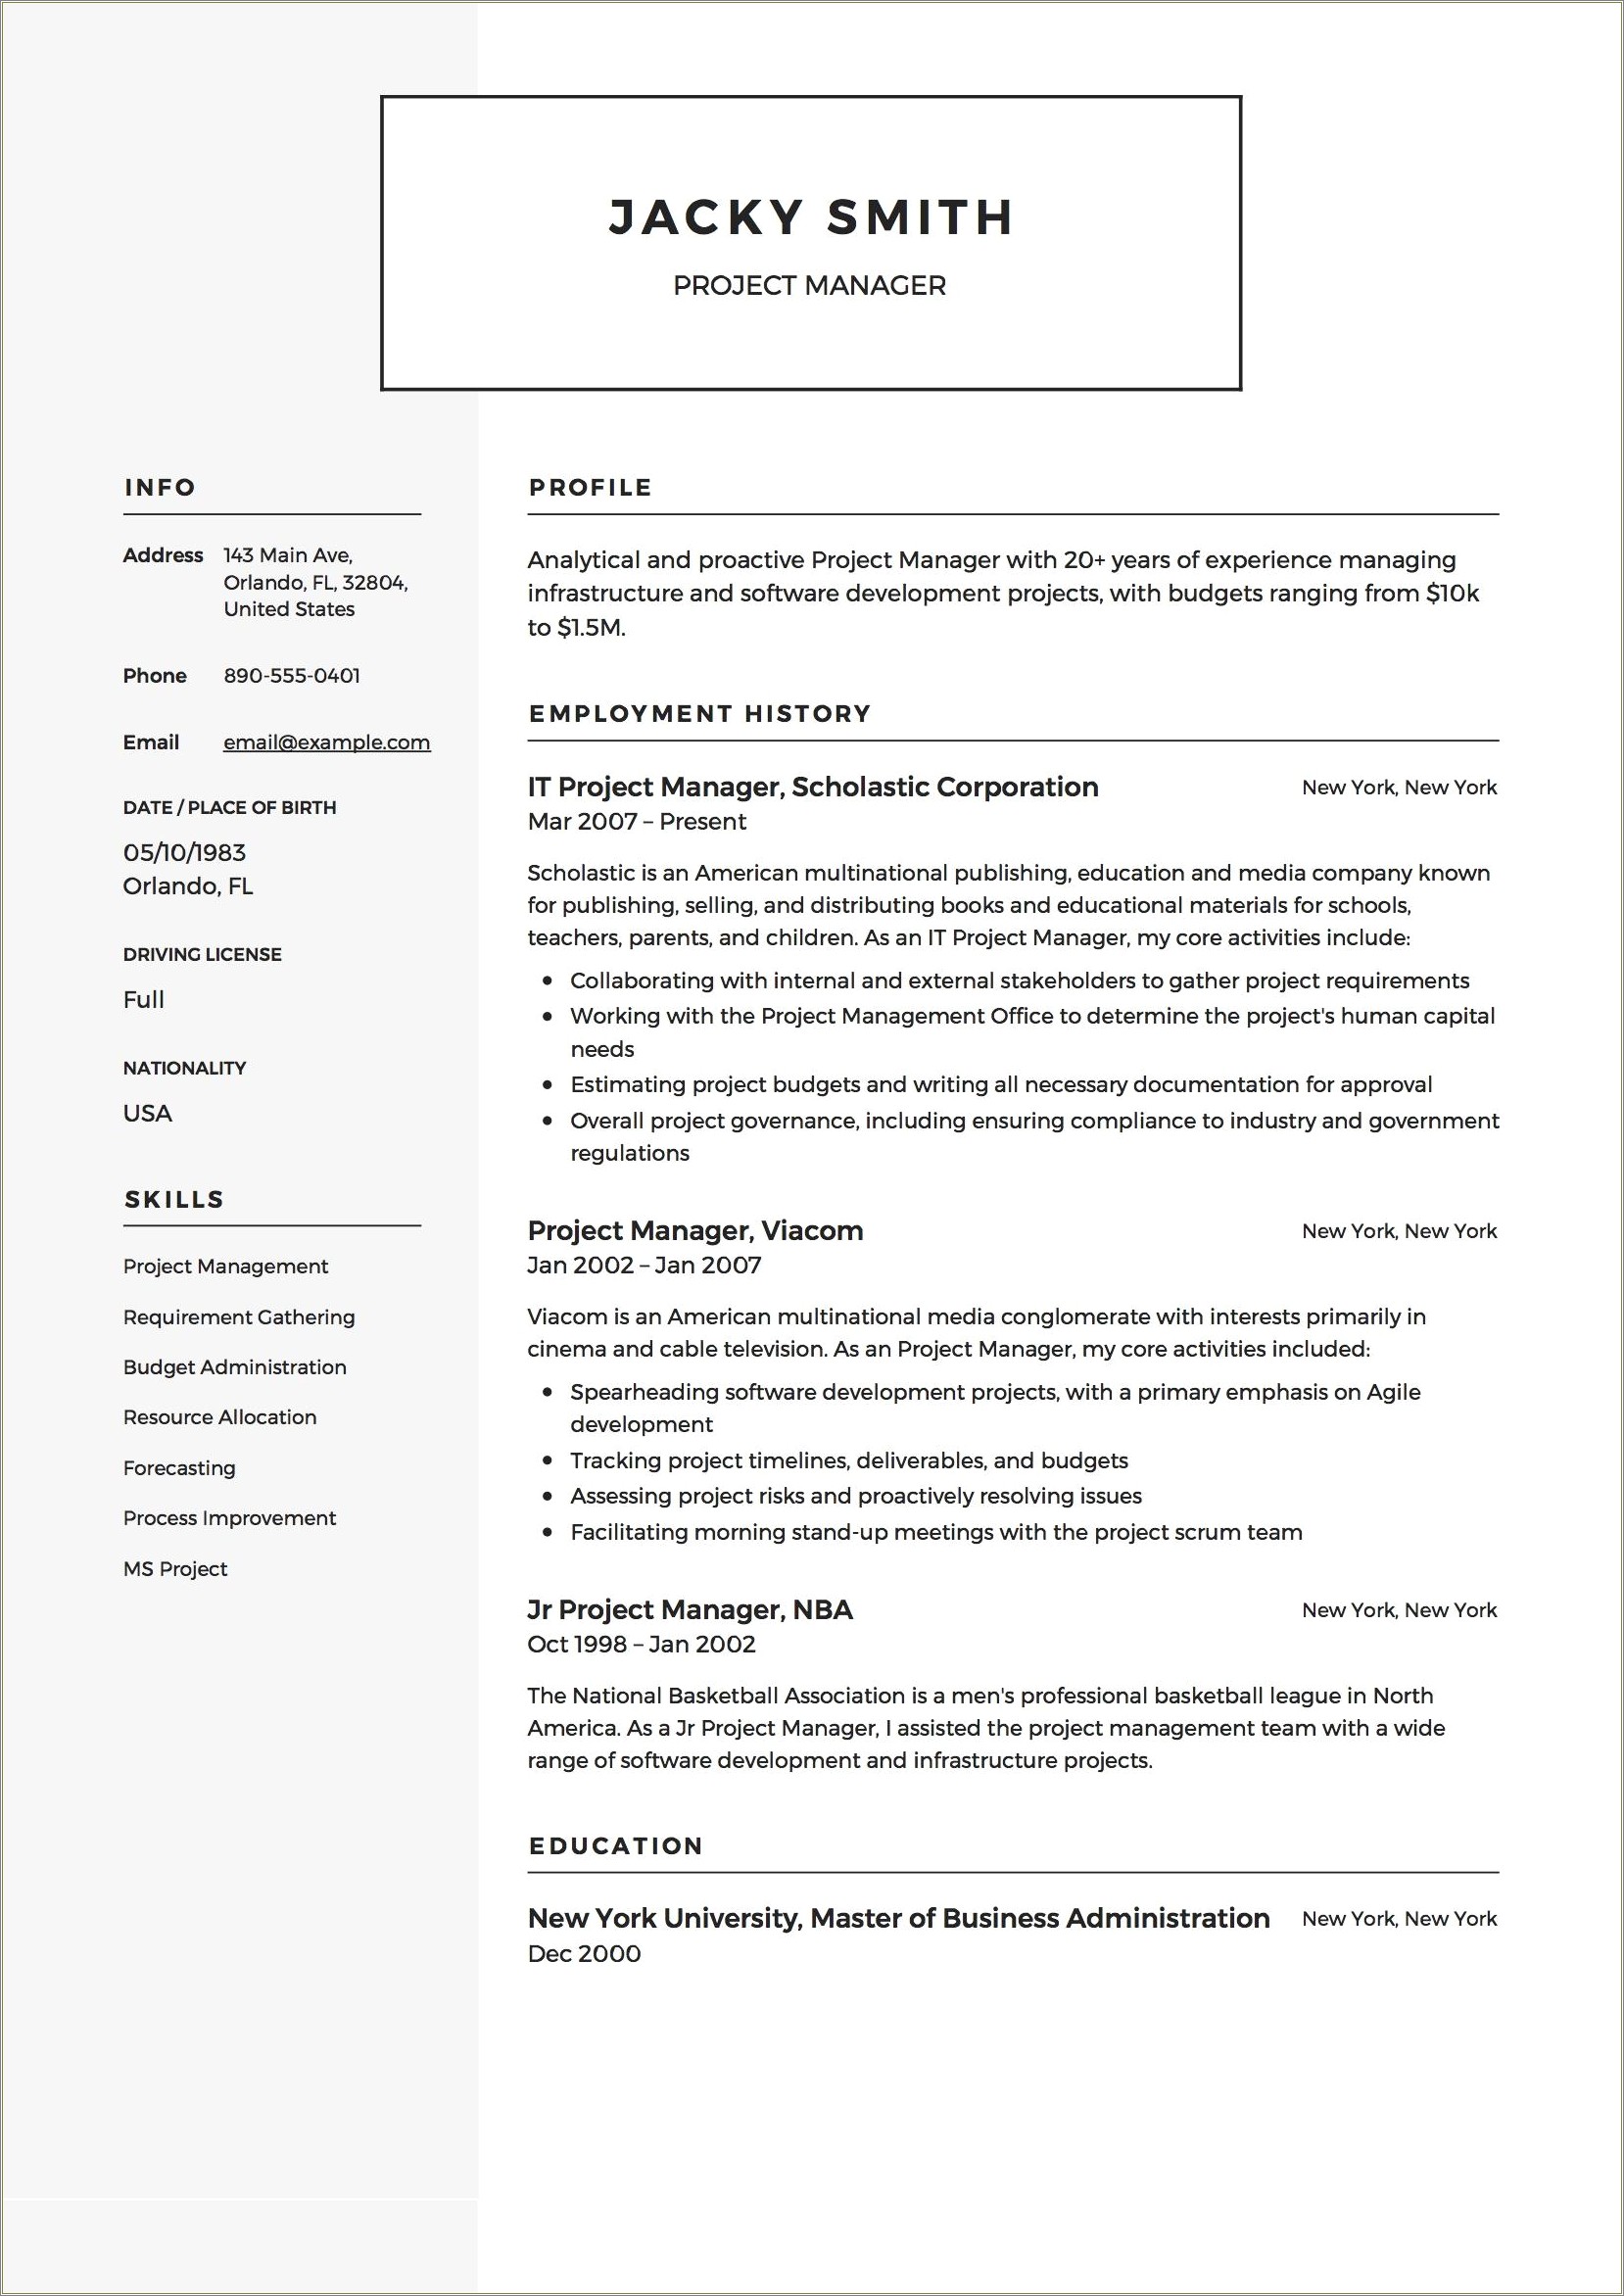 project manager buzzwords resume worded